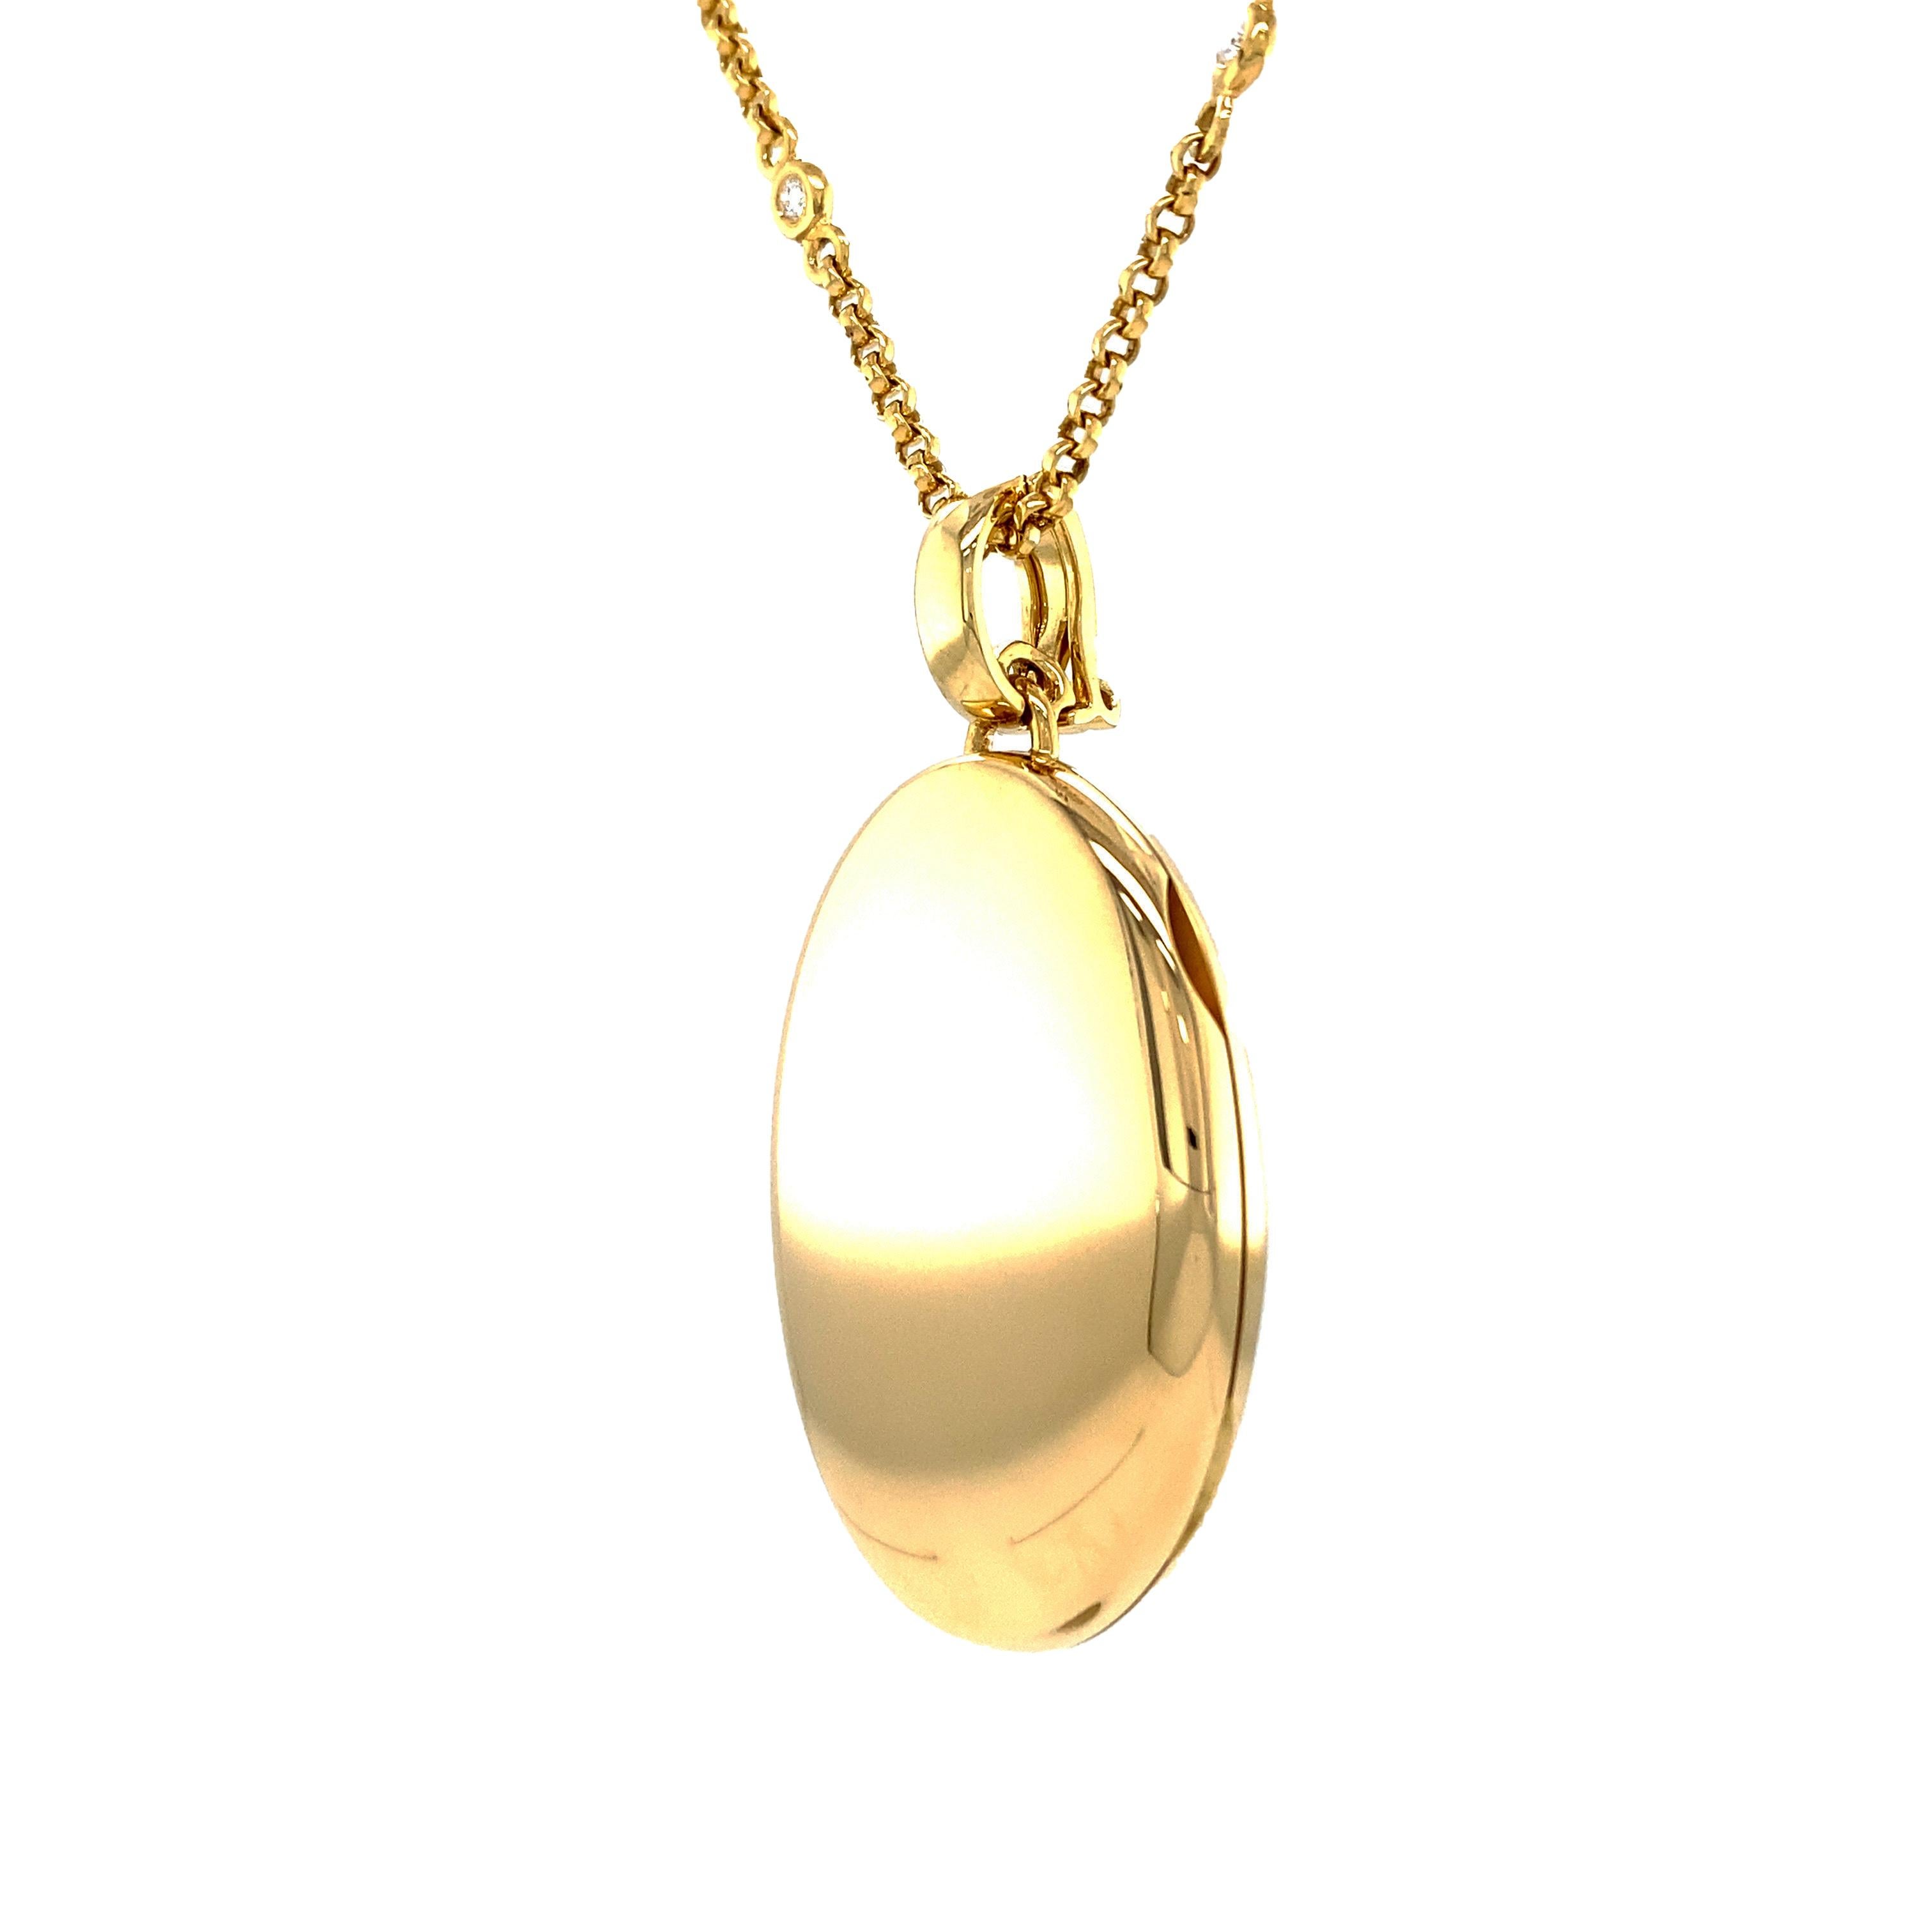 Customizable Oval Polished Pendant Locket - 18k Yellow Gold - 25.0 mm x 36.0 mm For Sale 3